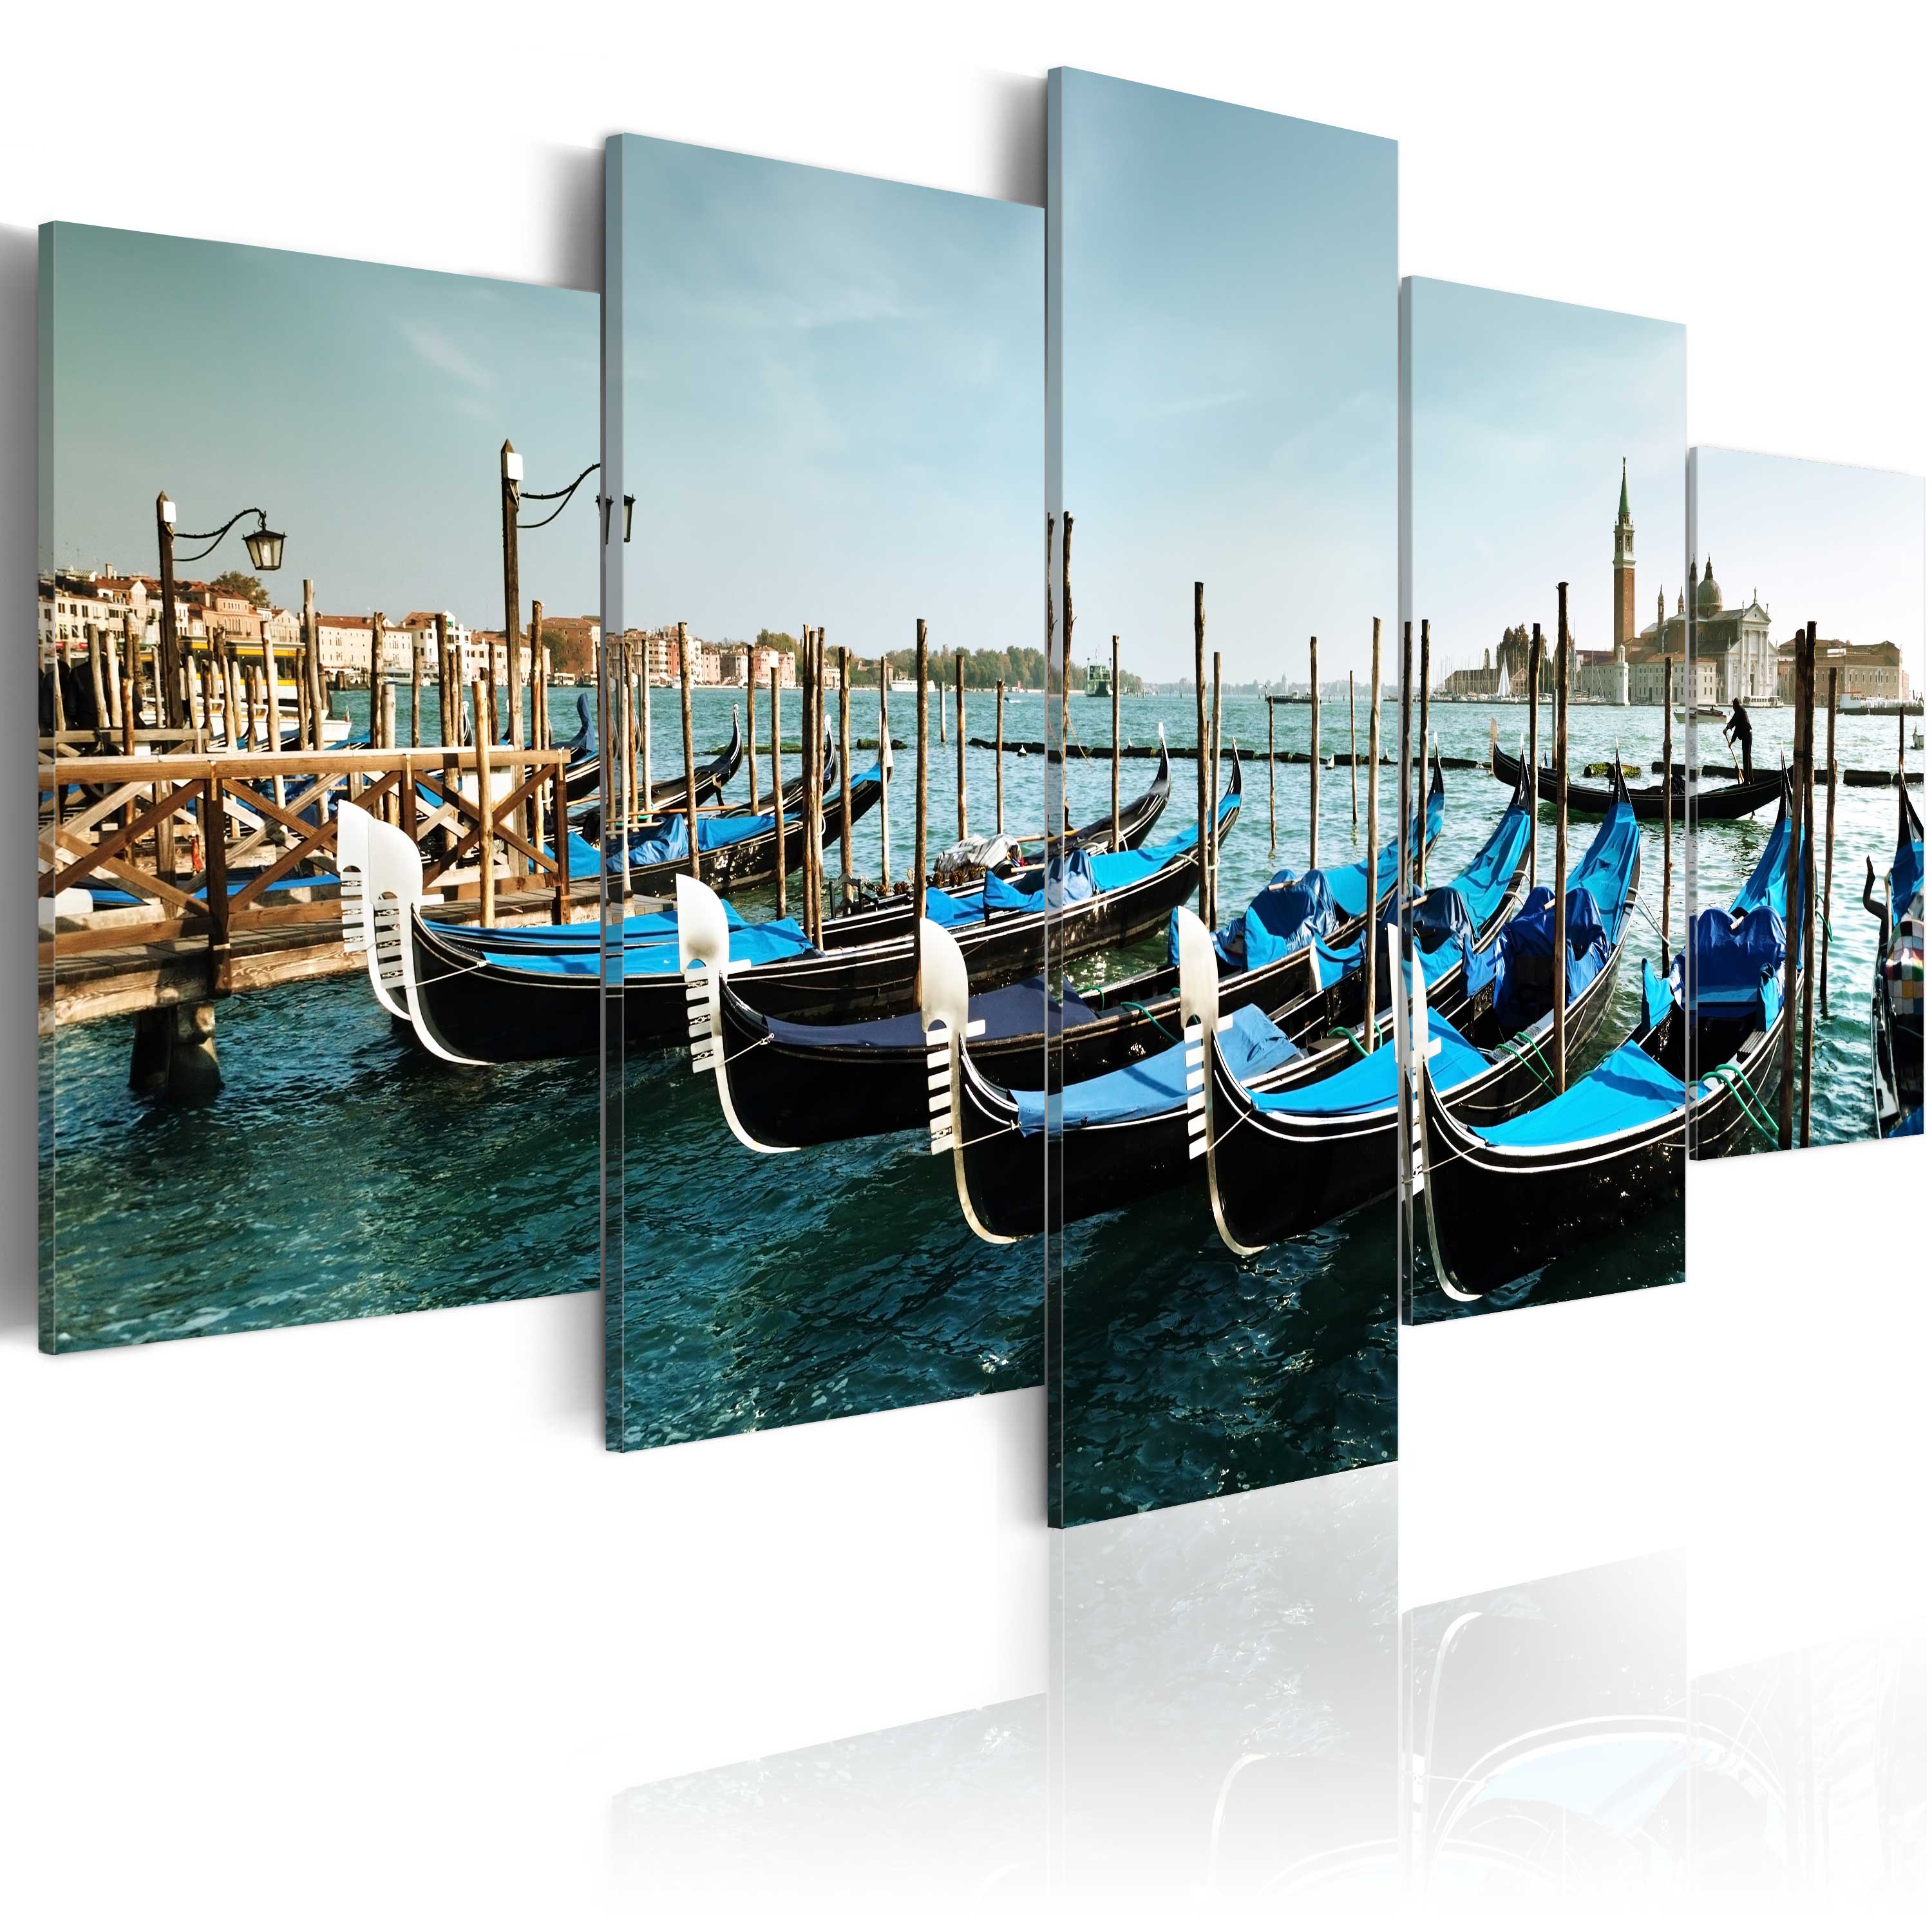 Canvas Print - A canal in Venice - 100x50